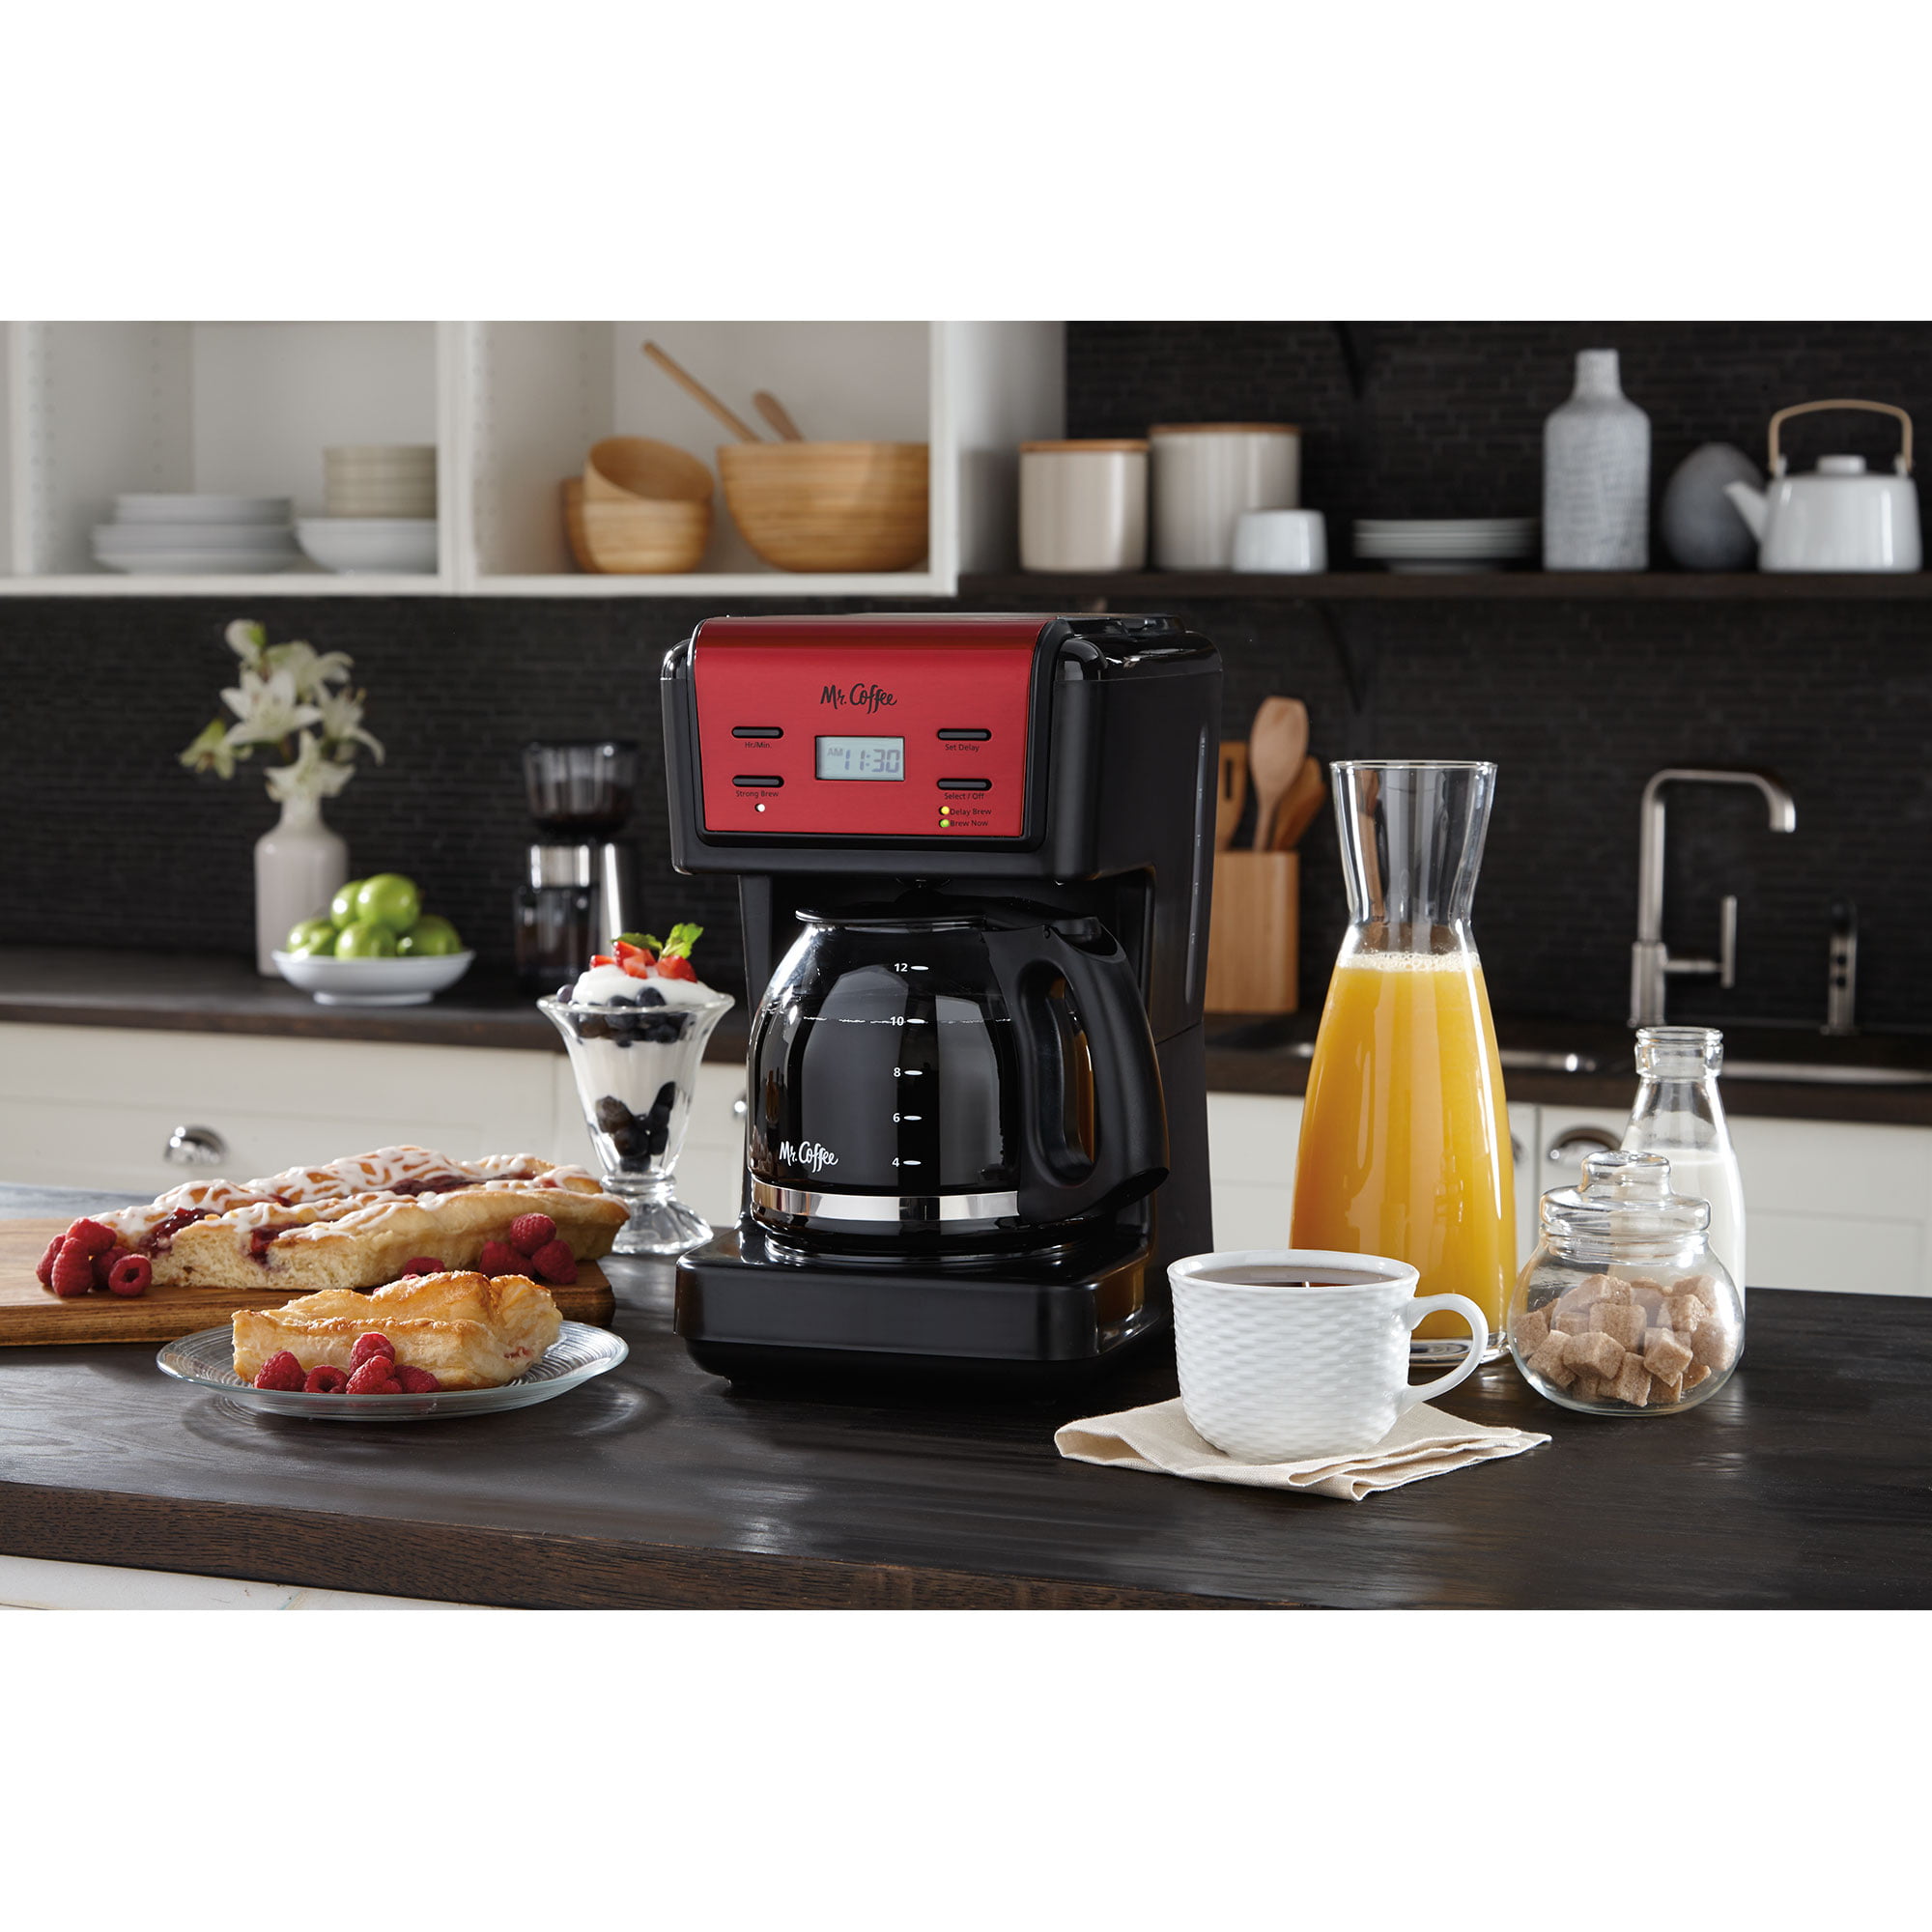 Mr. Coffee 12-Cup Programmable Coffeemaker, Rapid Brew, Red 